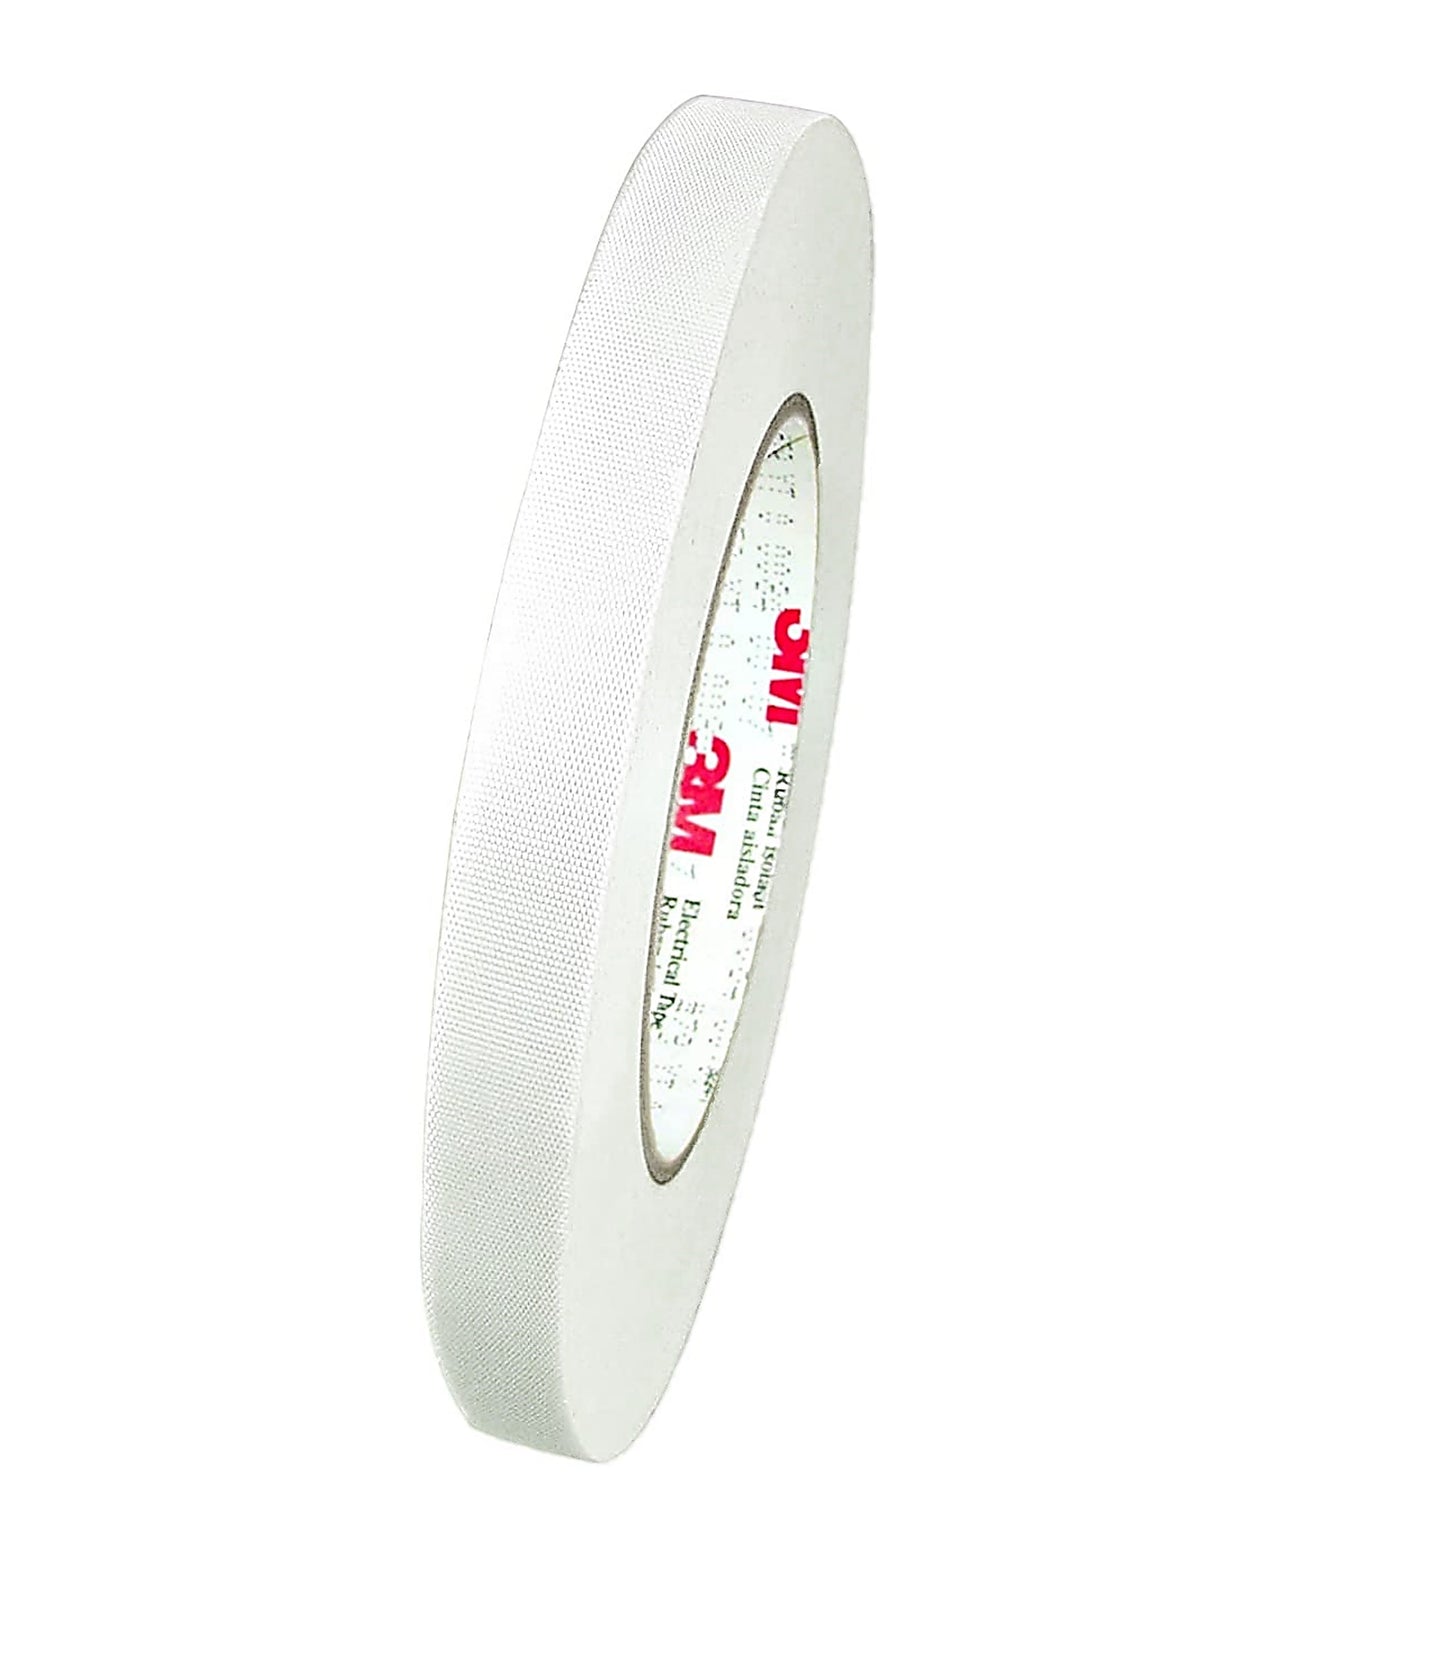 3M™ Glass Cloth Electrical Tape 79